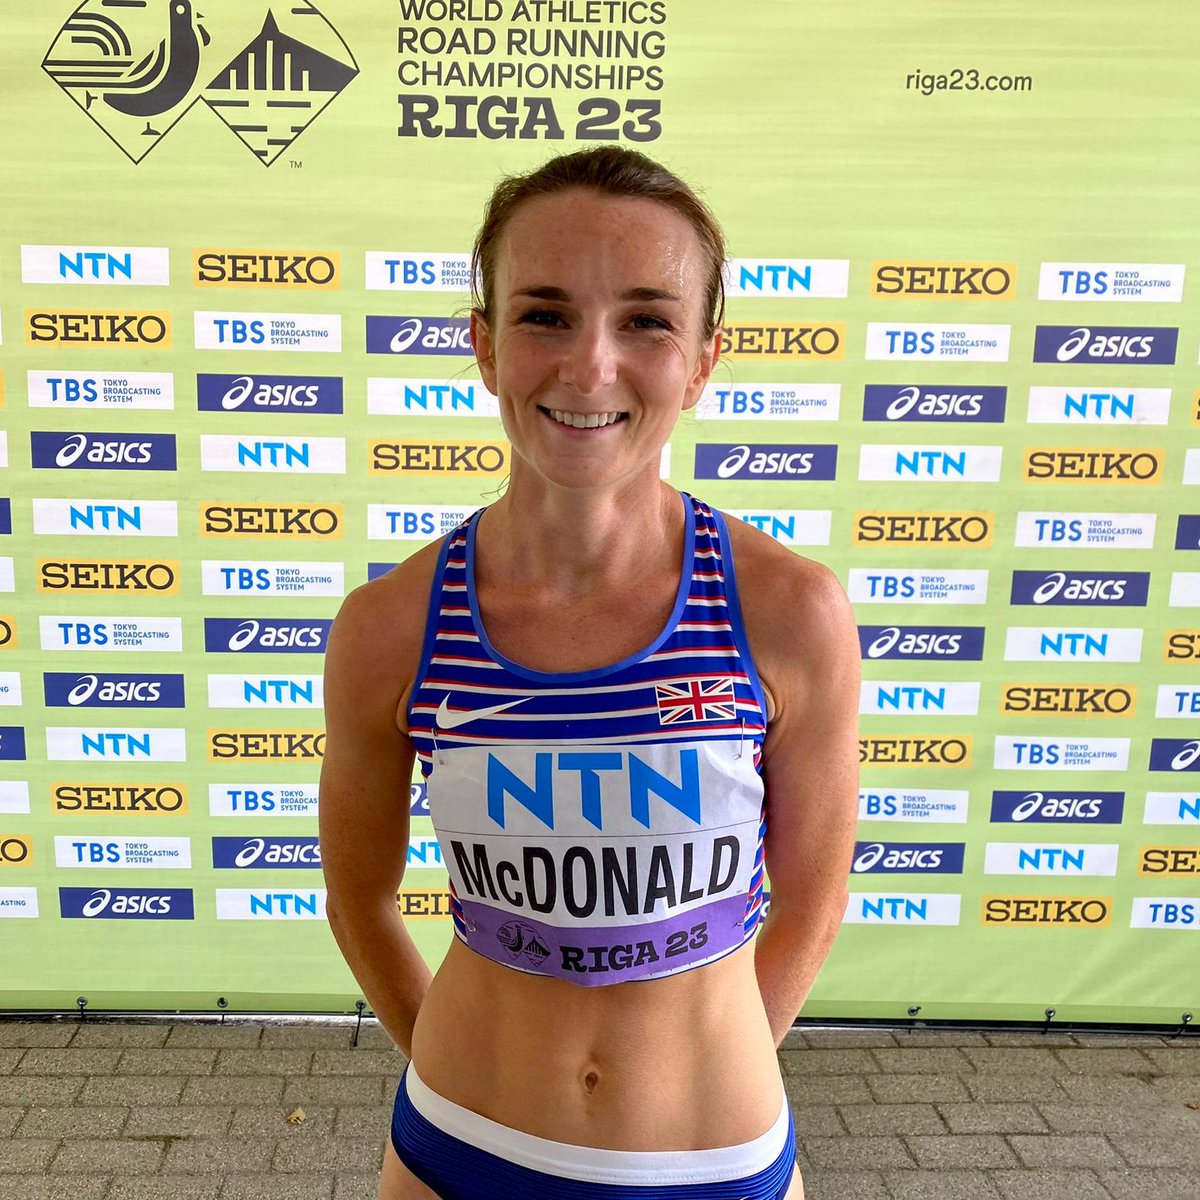 Congratulations to our staff member Sarah McDonald for her impressive 16th place finish in the highly competitive women’s mile race at the World Athletics Road Running Championships!🏃‍♀️🏅